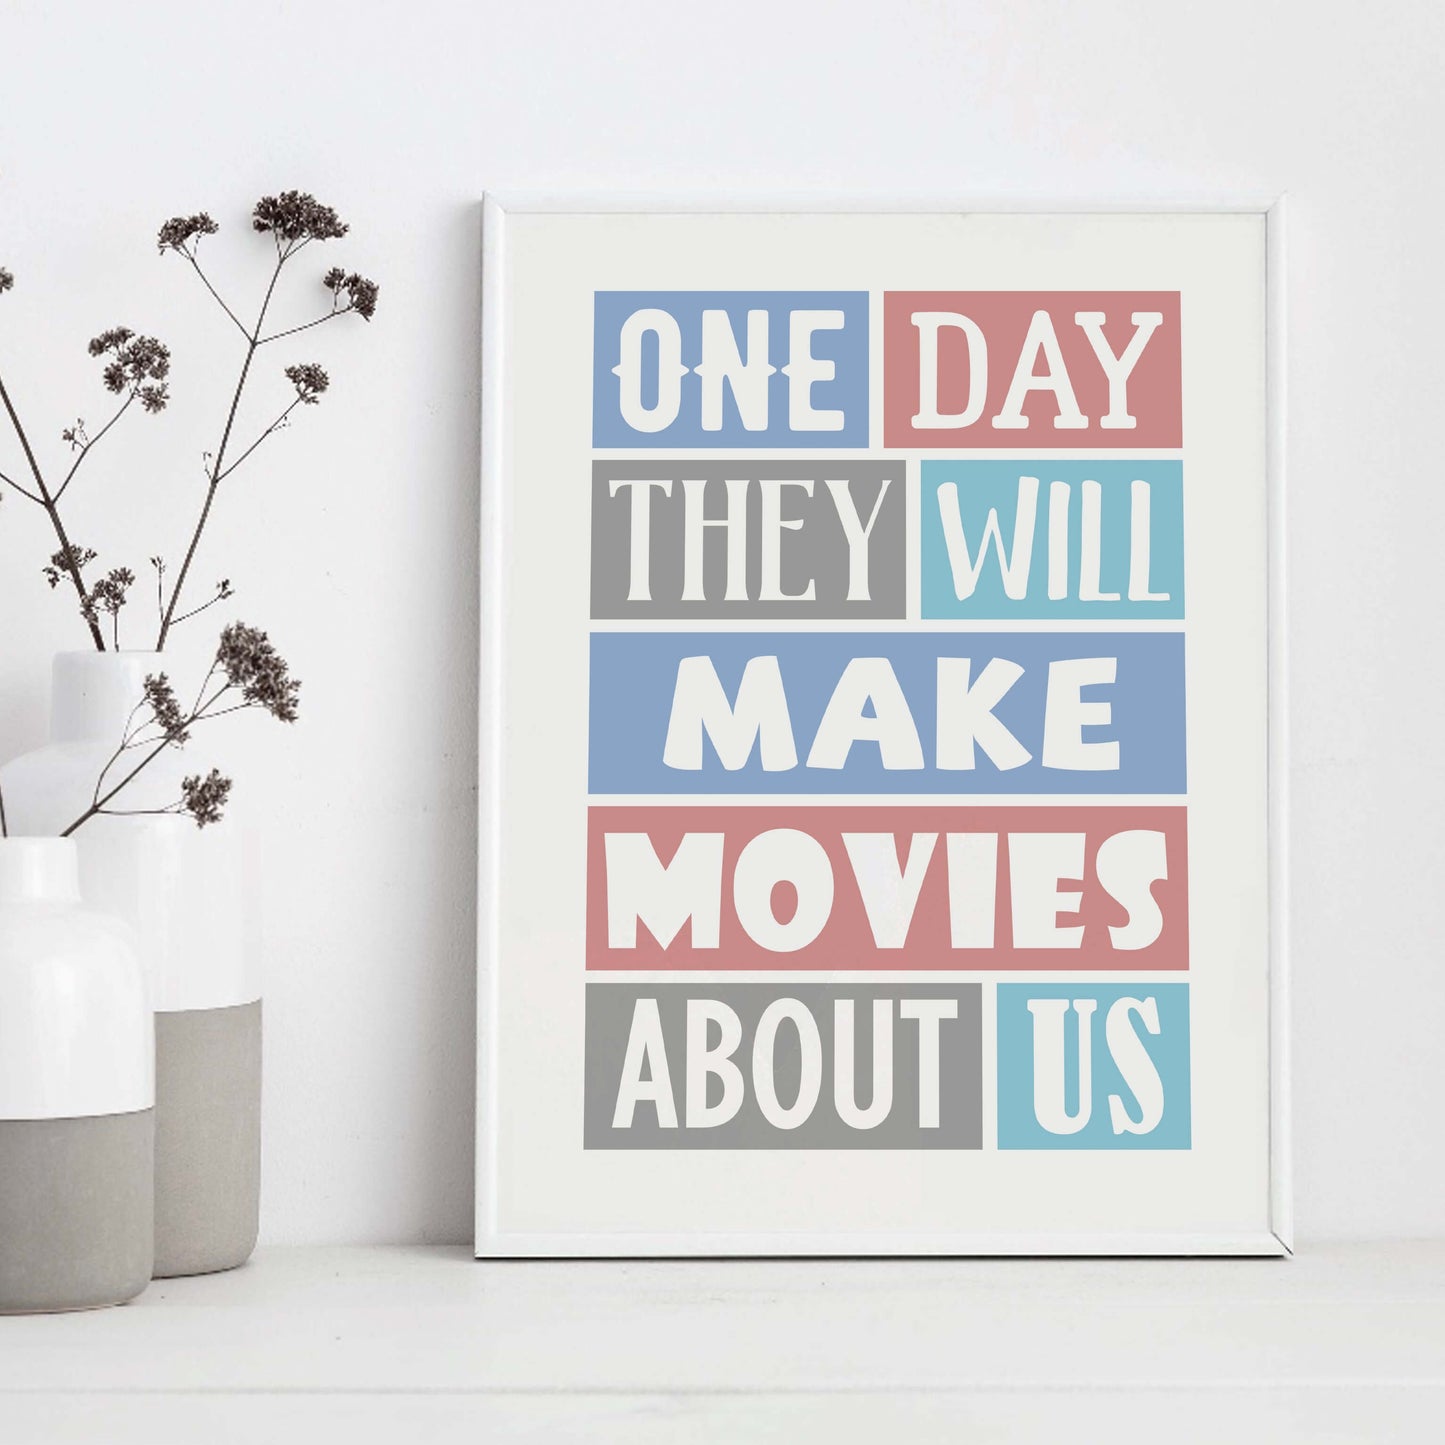 Romantic wall art with the quote "One Day They Will Make Movies About Us" by SixElevenCreations Product Code SEP0021A4